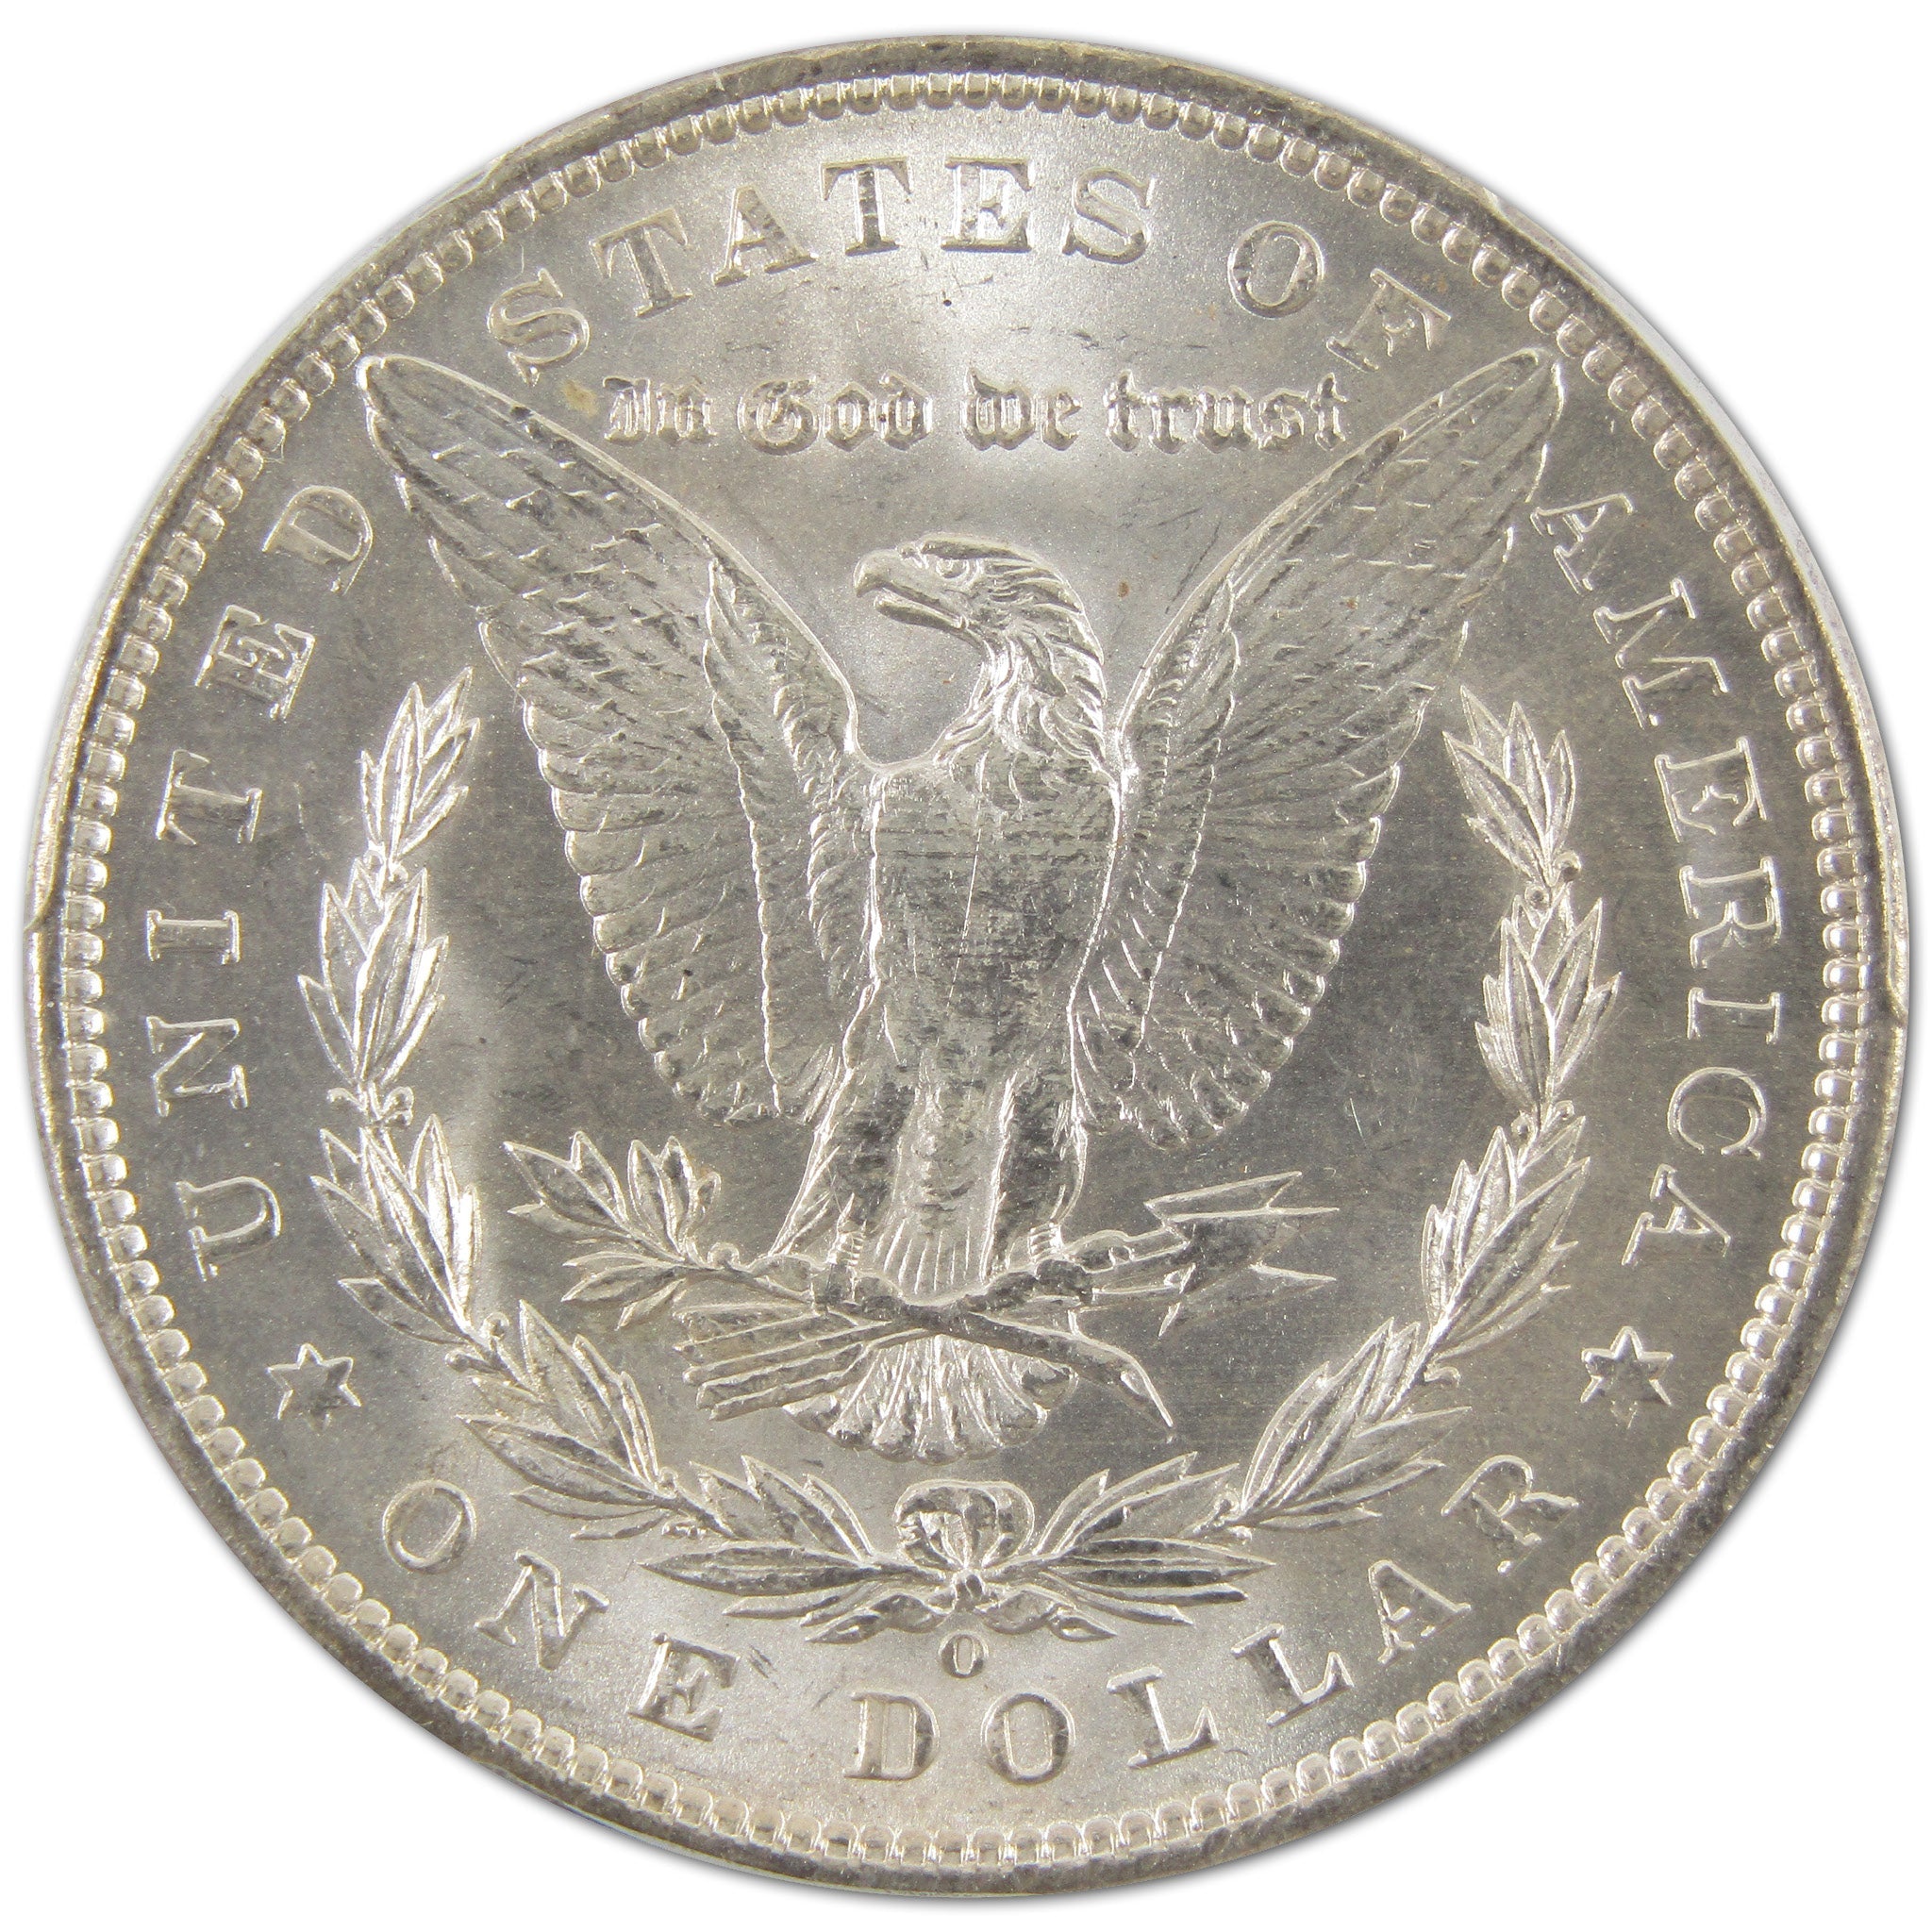 1892 O Morgan Dollar MS 63 PCGS Silver $1 Uncirculated Coin SKU:I10814 - Morgan coin - Morgan silver dollar - Morgan silver dollar for sale - Profile Coins &amp; Collectibles